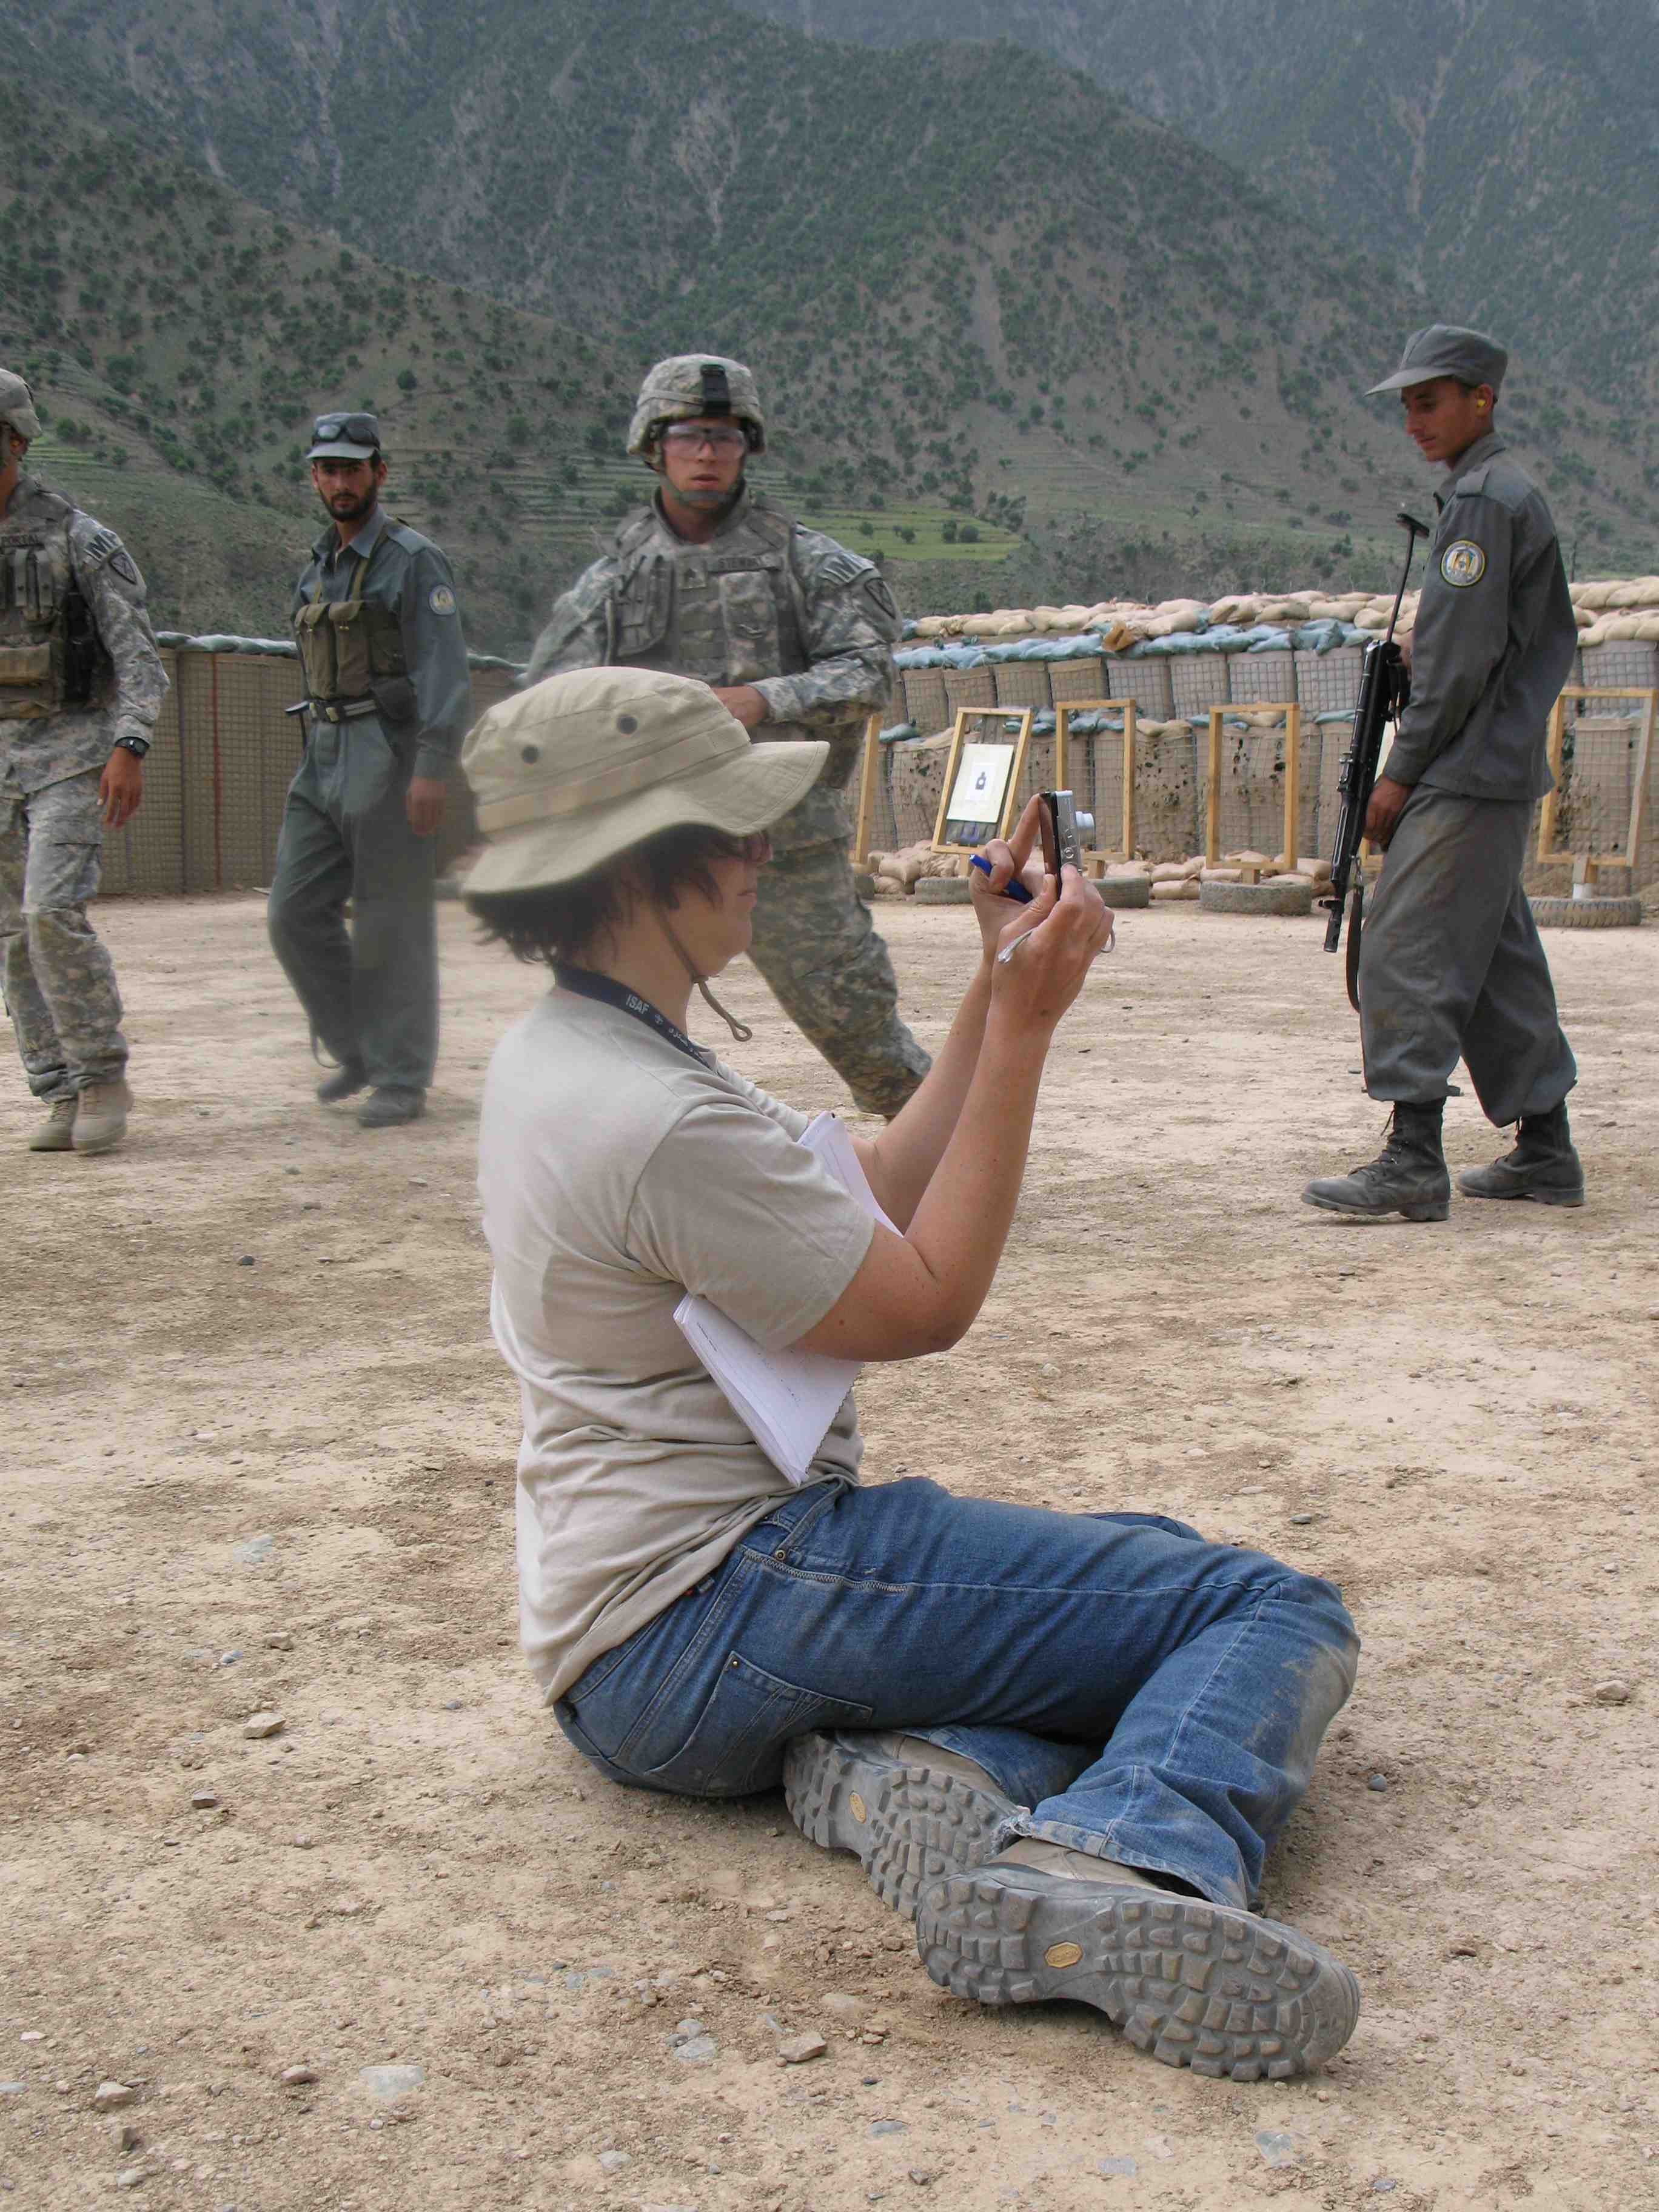 Kim Barker taking pictures of police training/2007